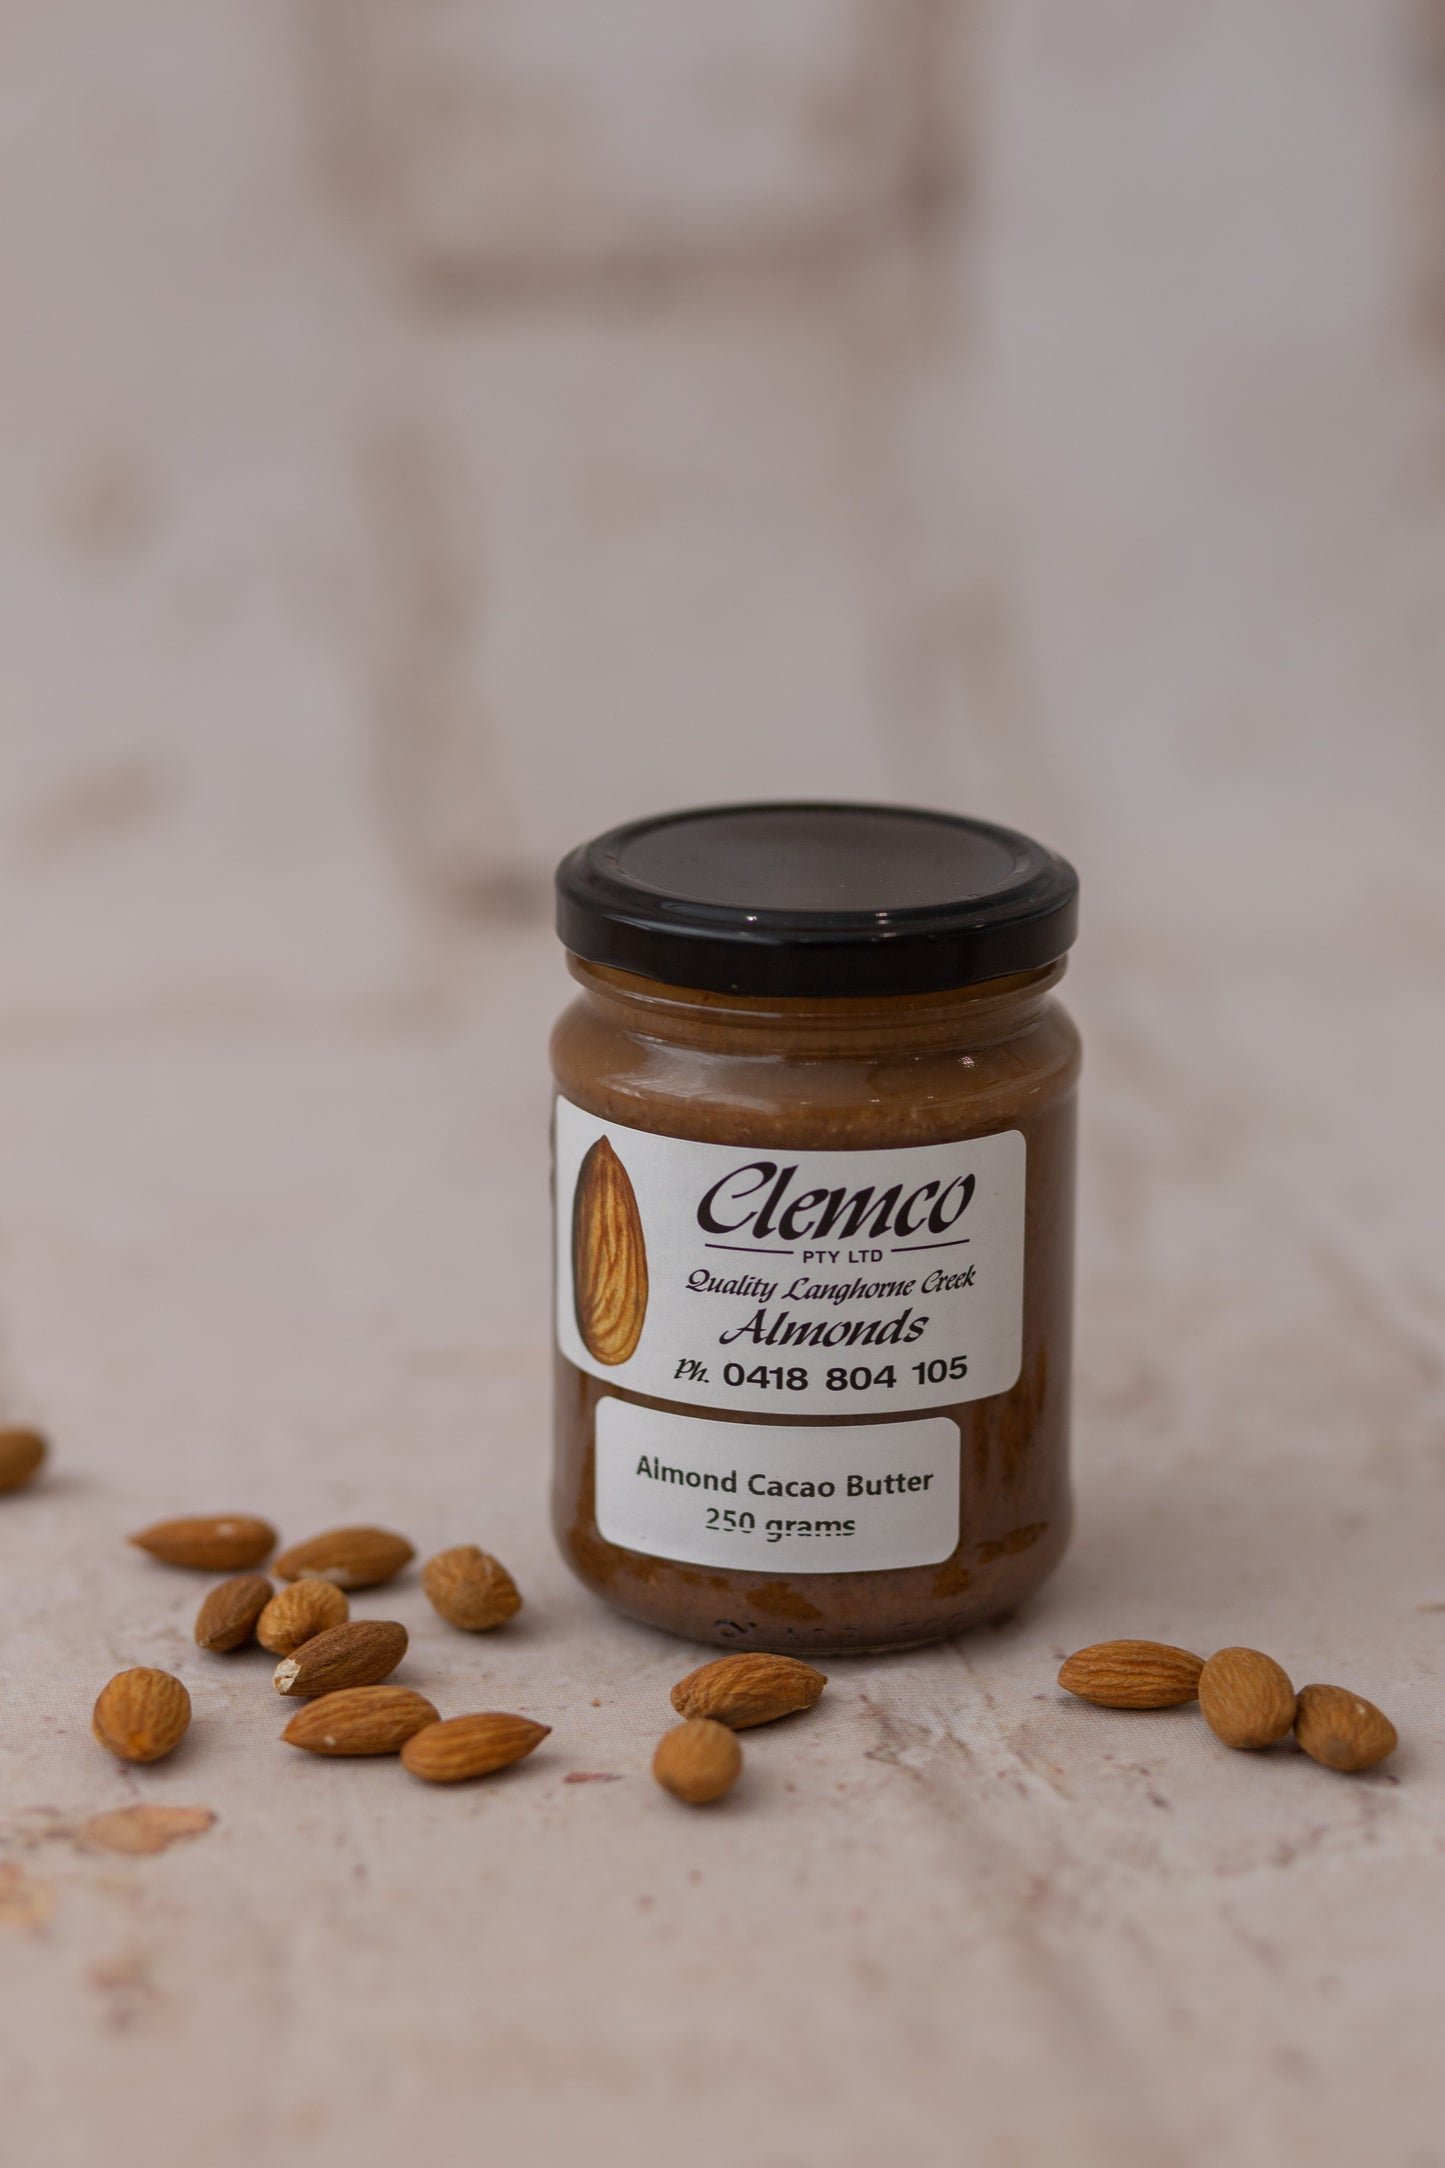 Almond Cacao Butter